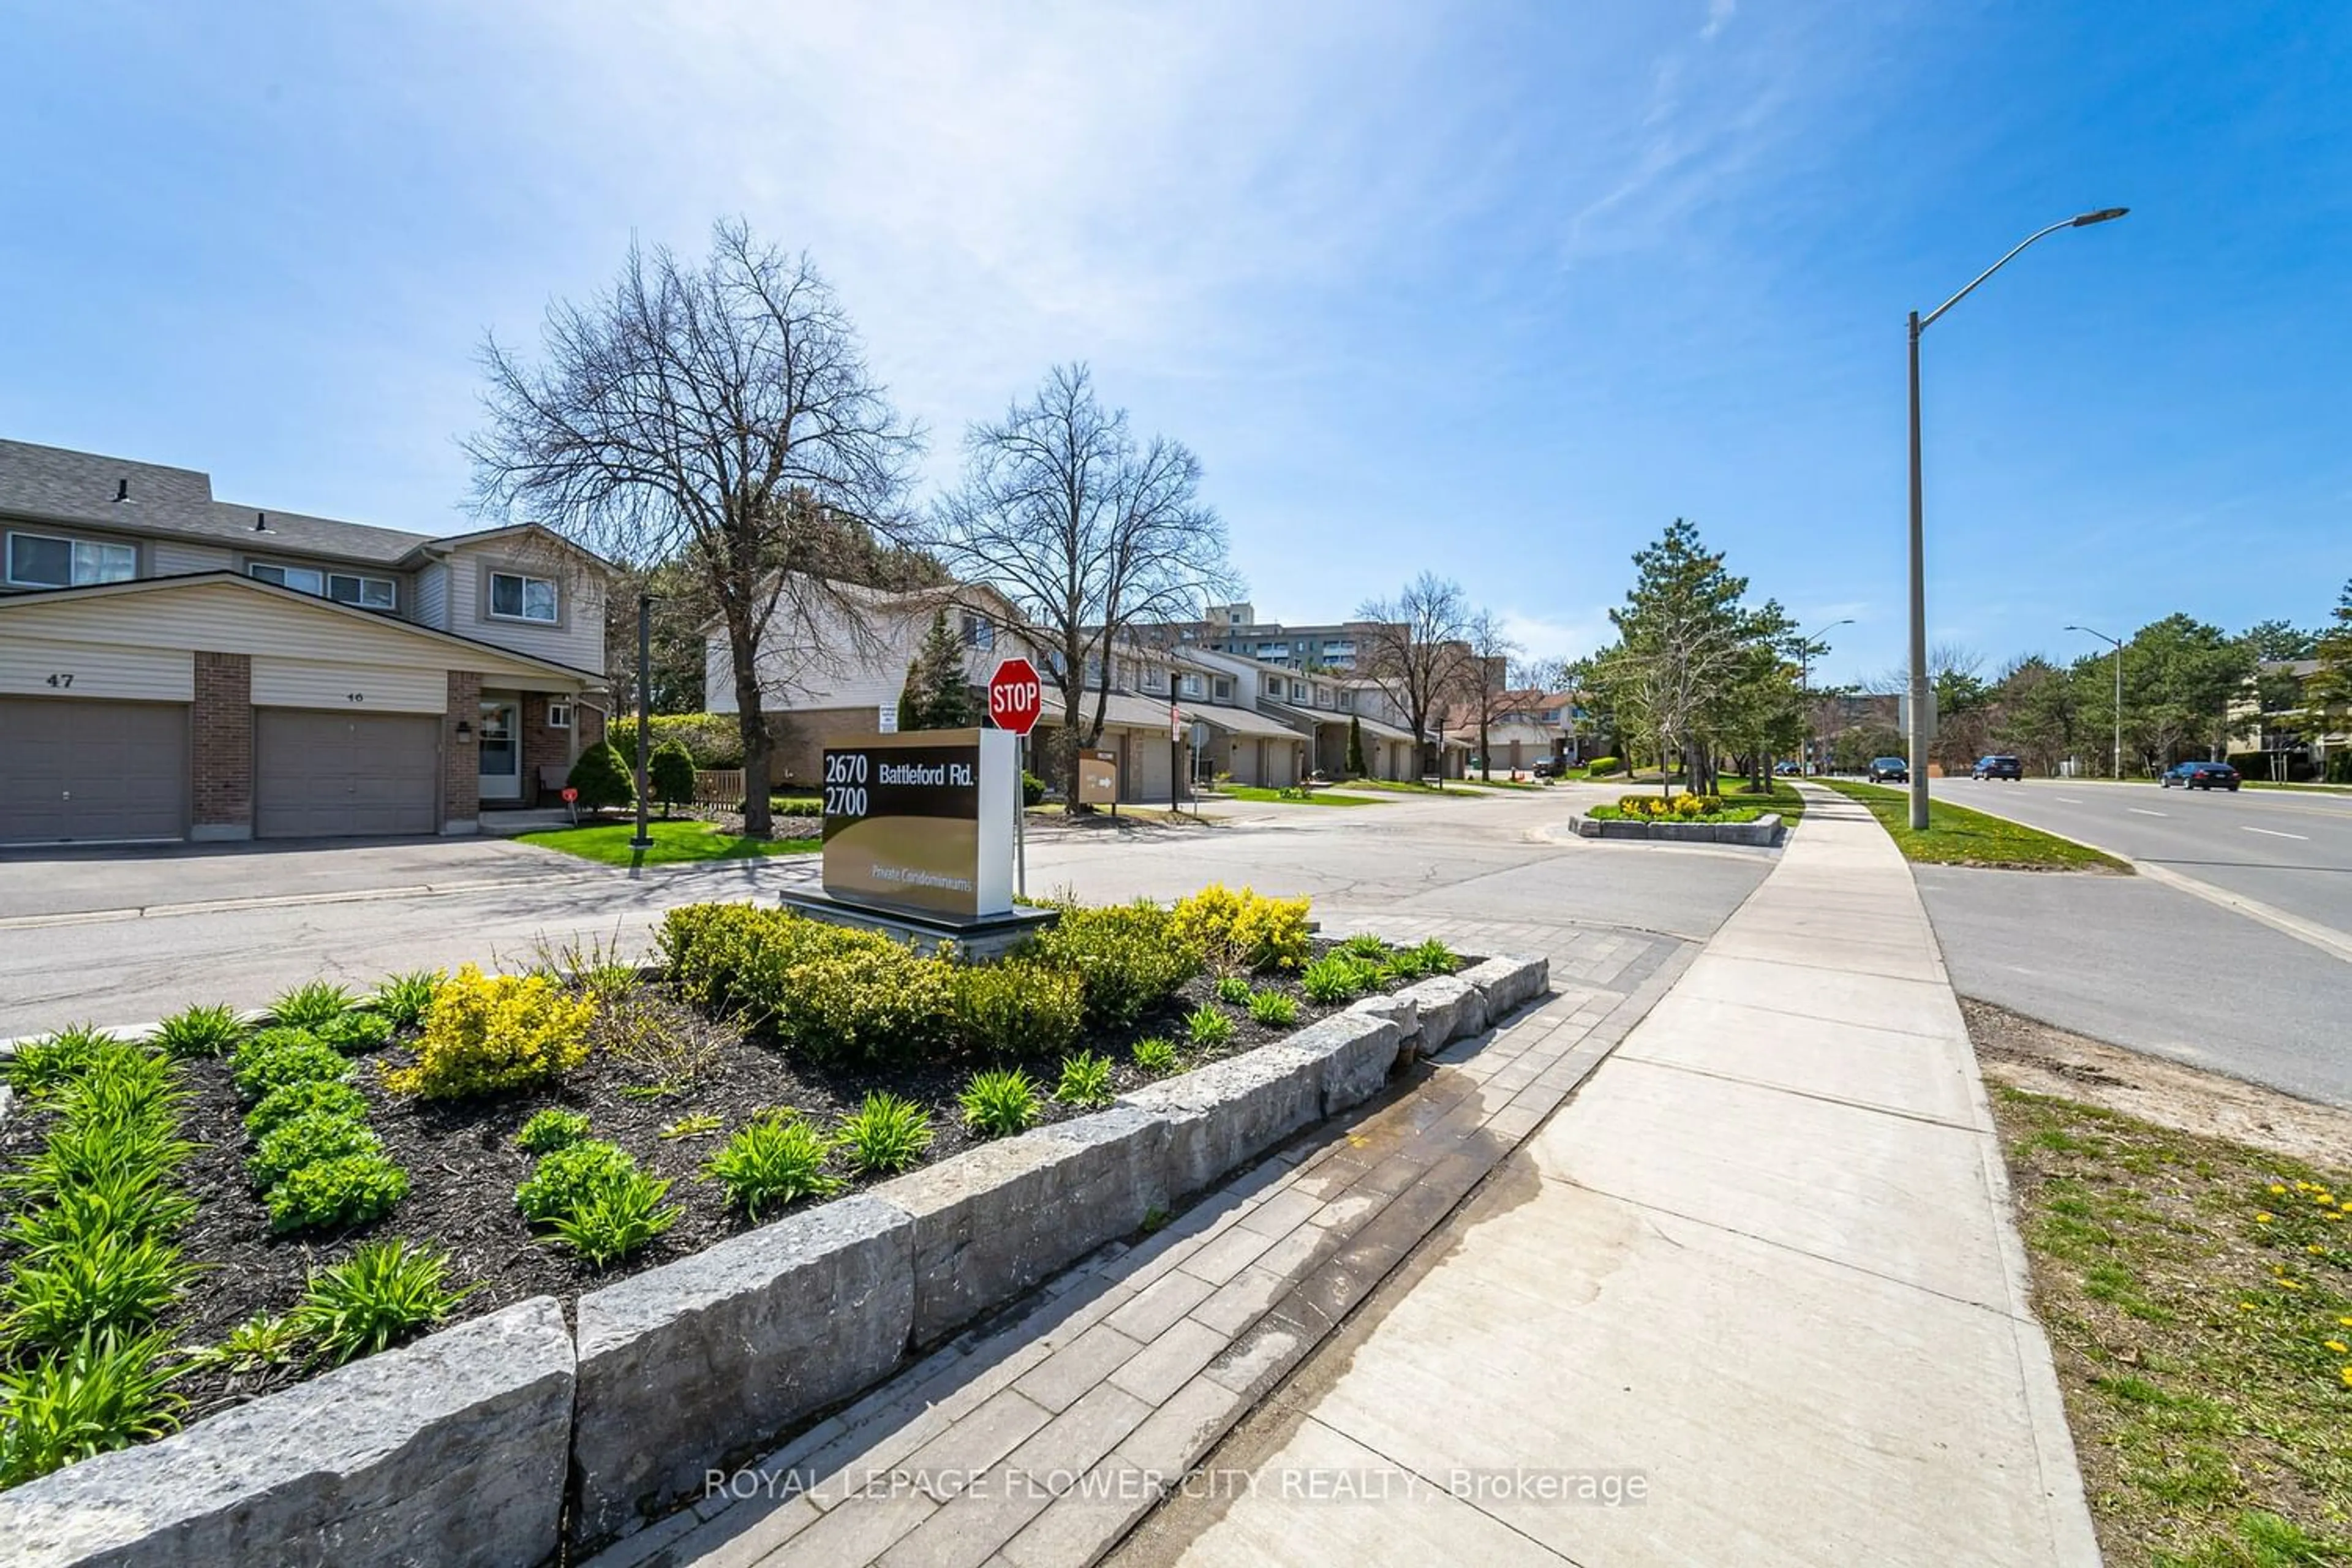 A view of a street for 2700 Battleford Rd ##37, Mississauga Ontario L5N 2S7